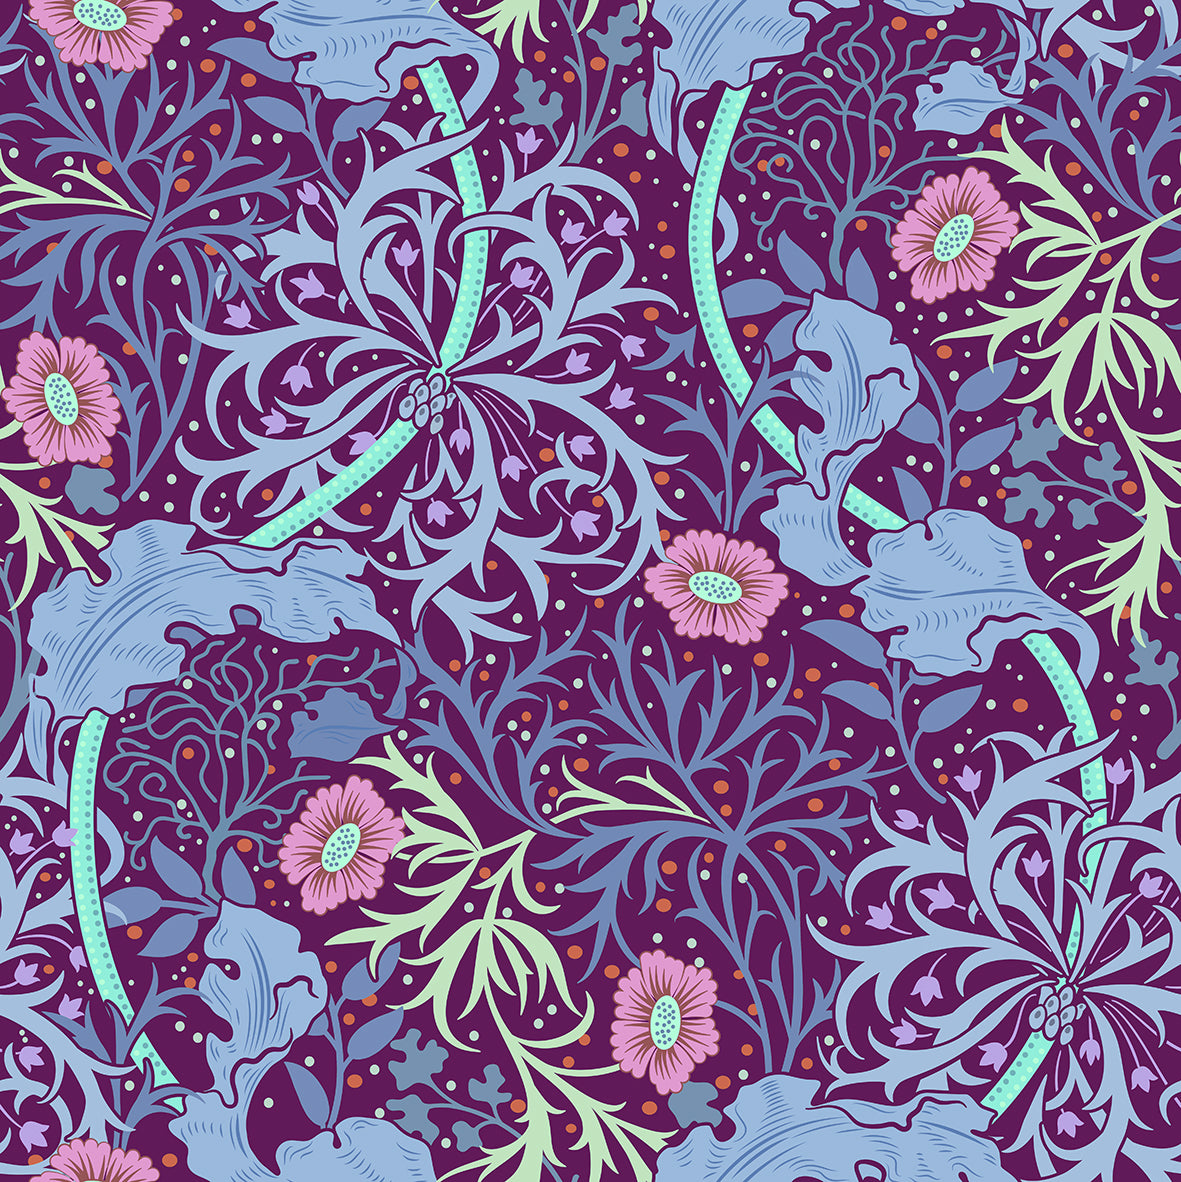 william-morris-co-heavy-duty-floor-mat-seaweed-collection-pink-flowers-2